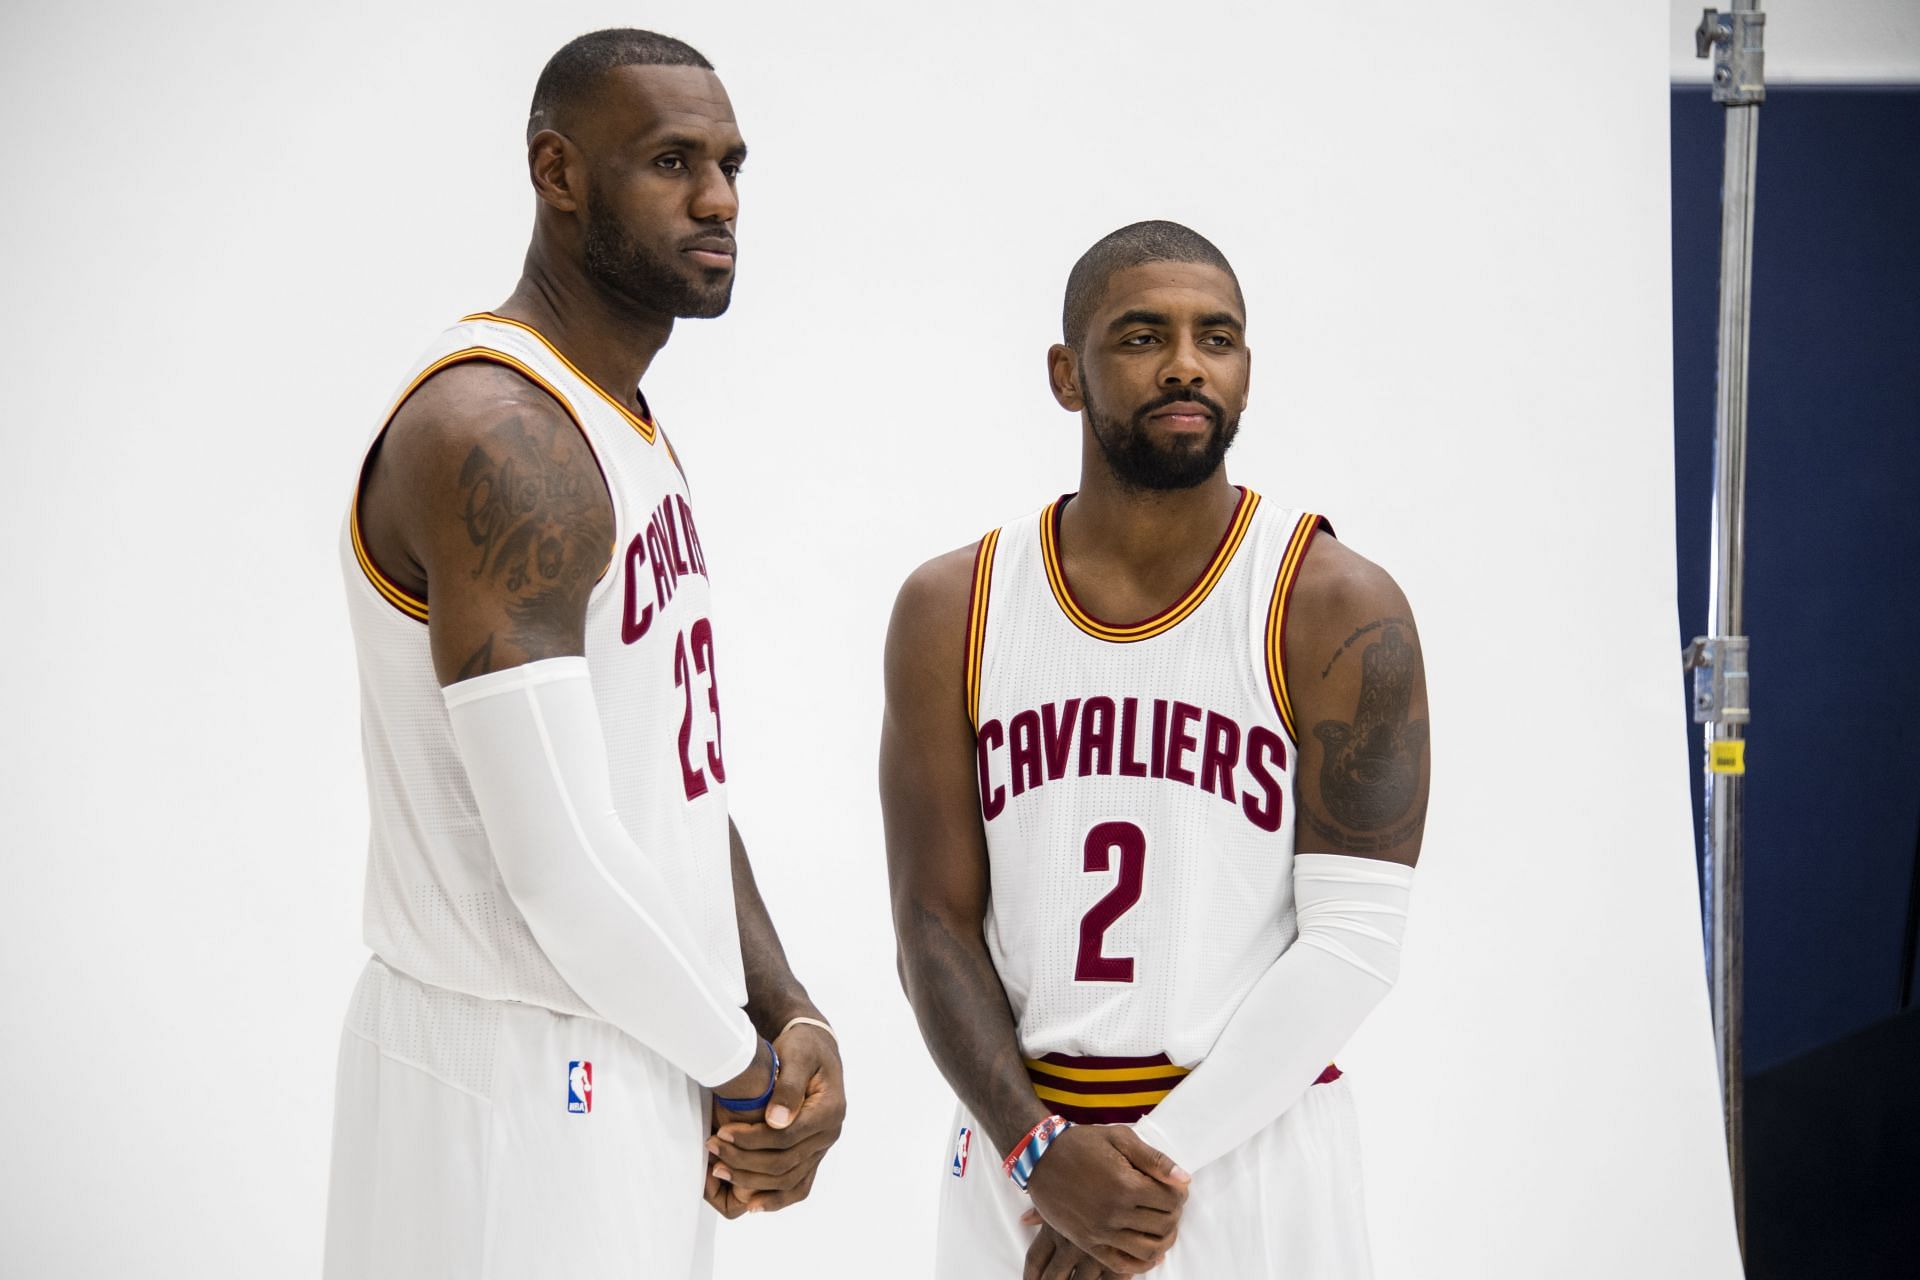 Kyrie Irving and LeBron James were stellar when they played together for the Cleveland Cavaliers.